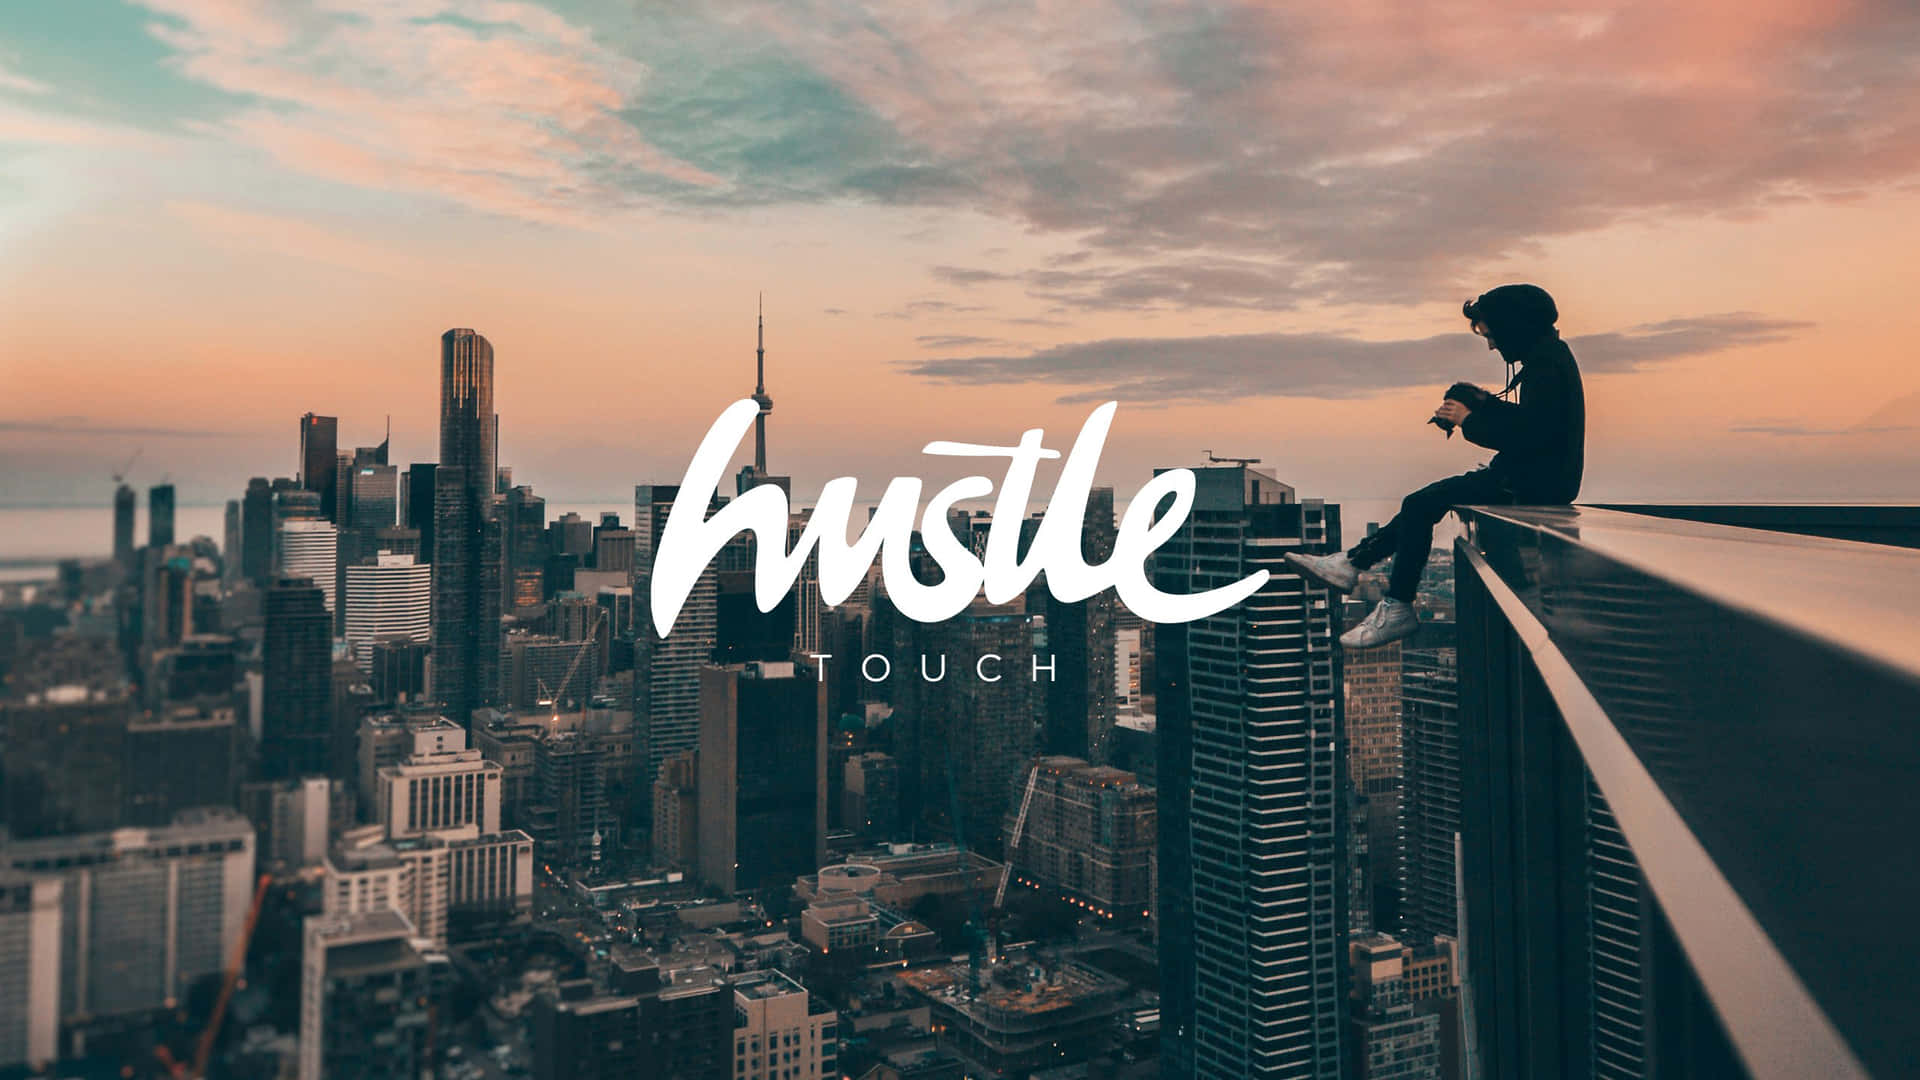 Hustle - A Cityscape With A Person Sitting On A Ledge Wallpaper